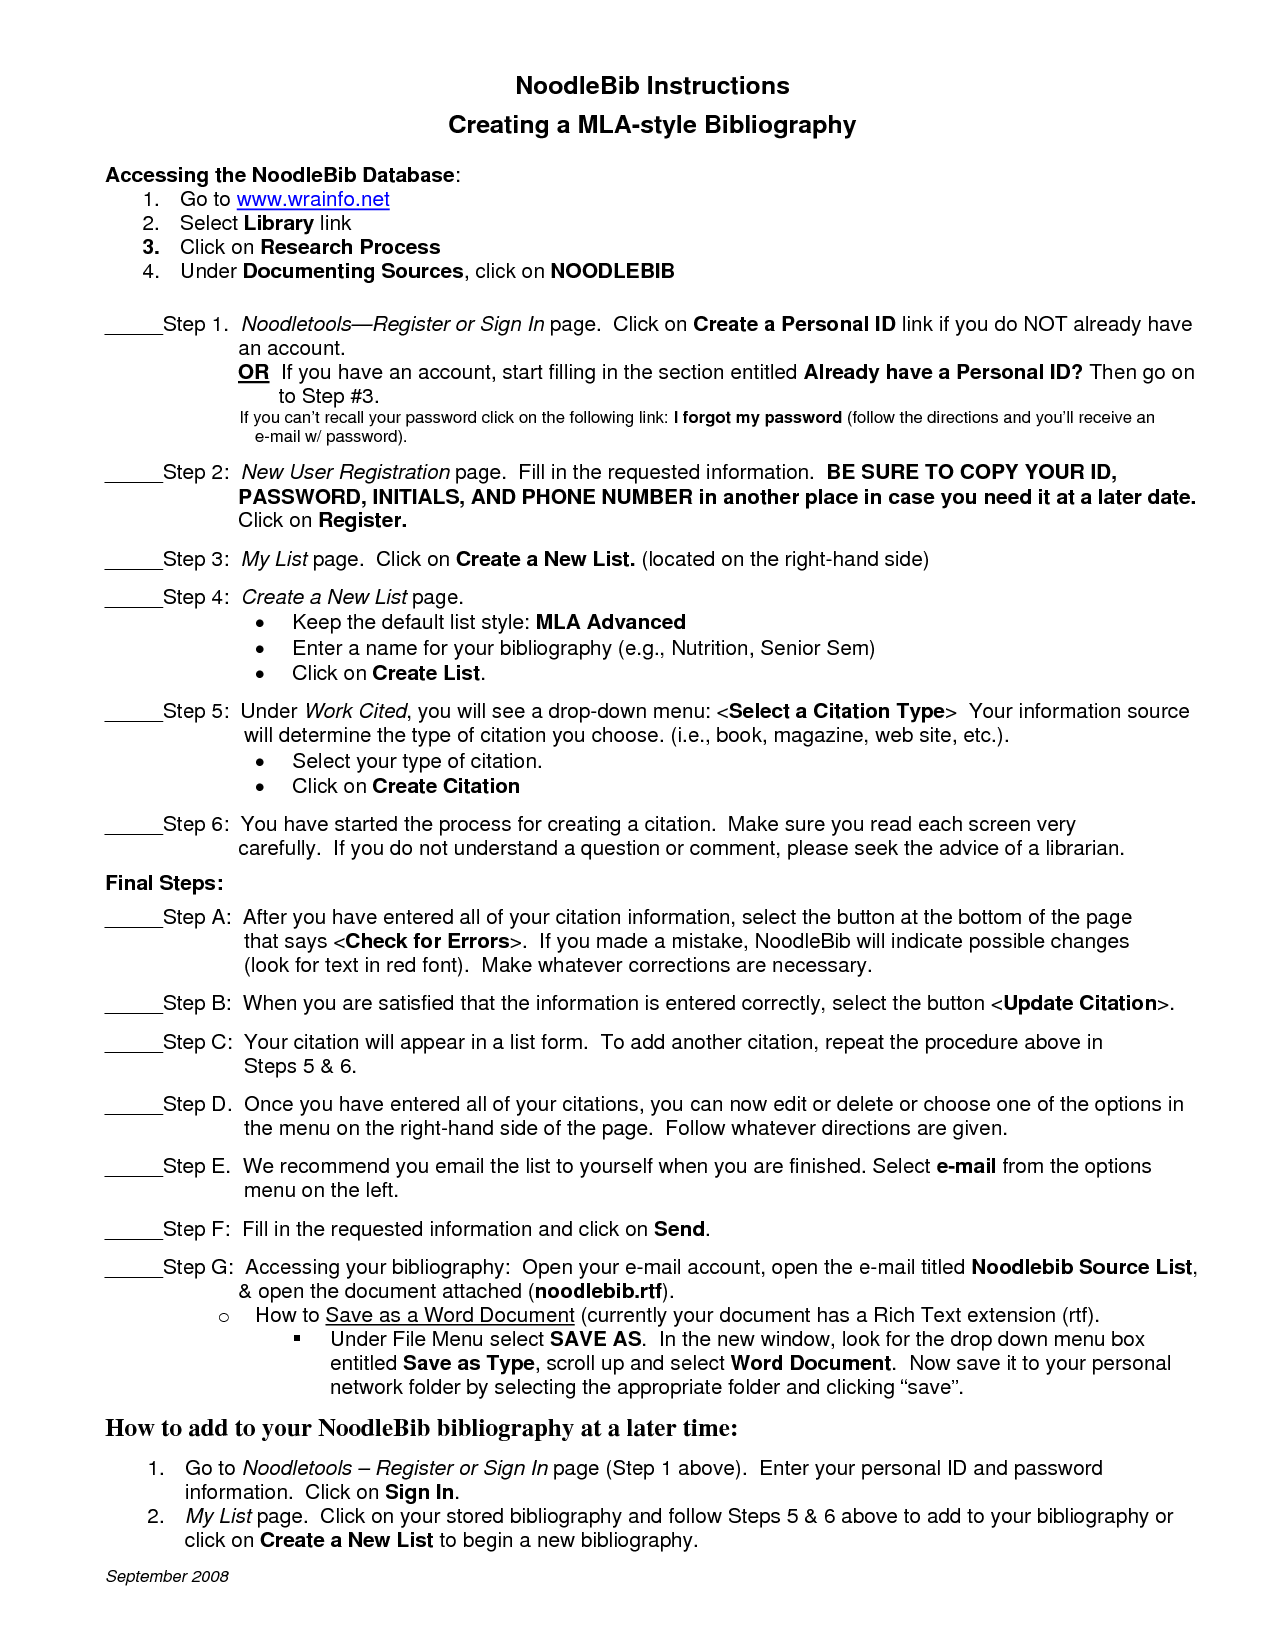 MLA Format of an Annotated Bibliography | Annotated ...